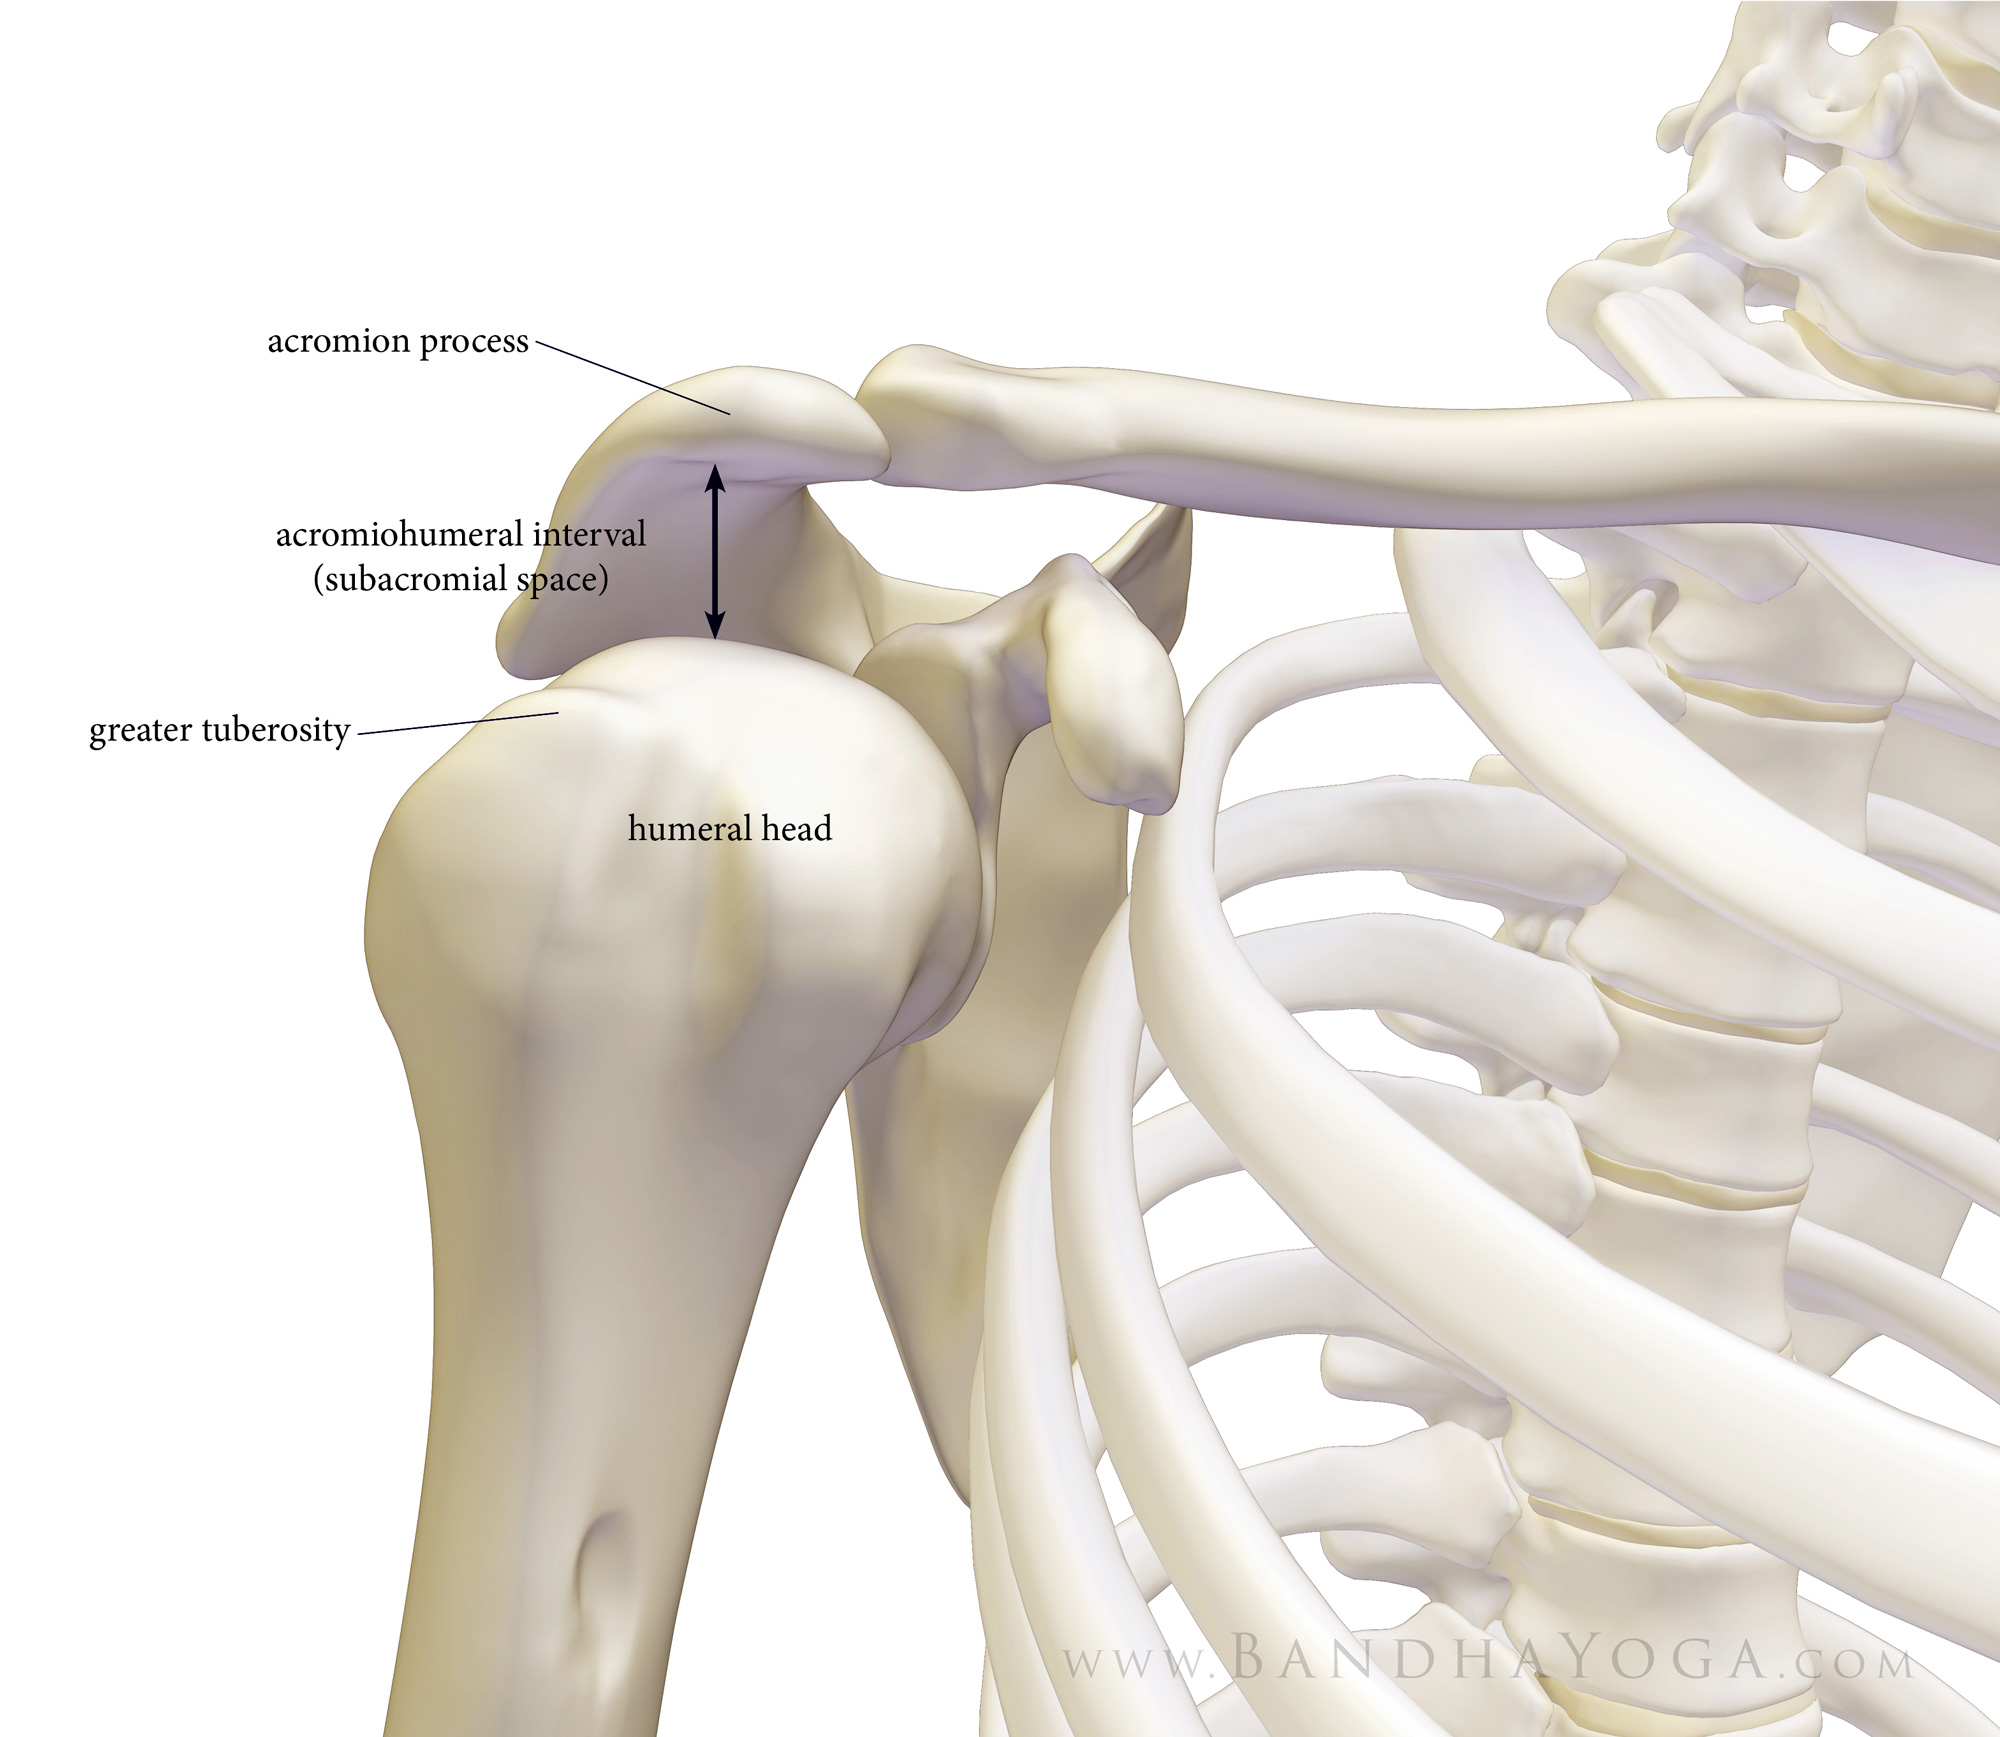 An anatomical illustration of the acromio-humeral interval of the shoulder